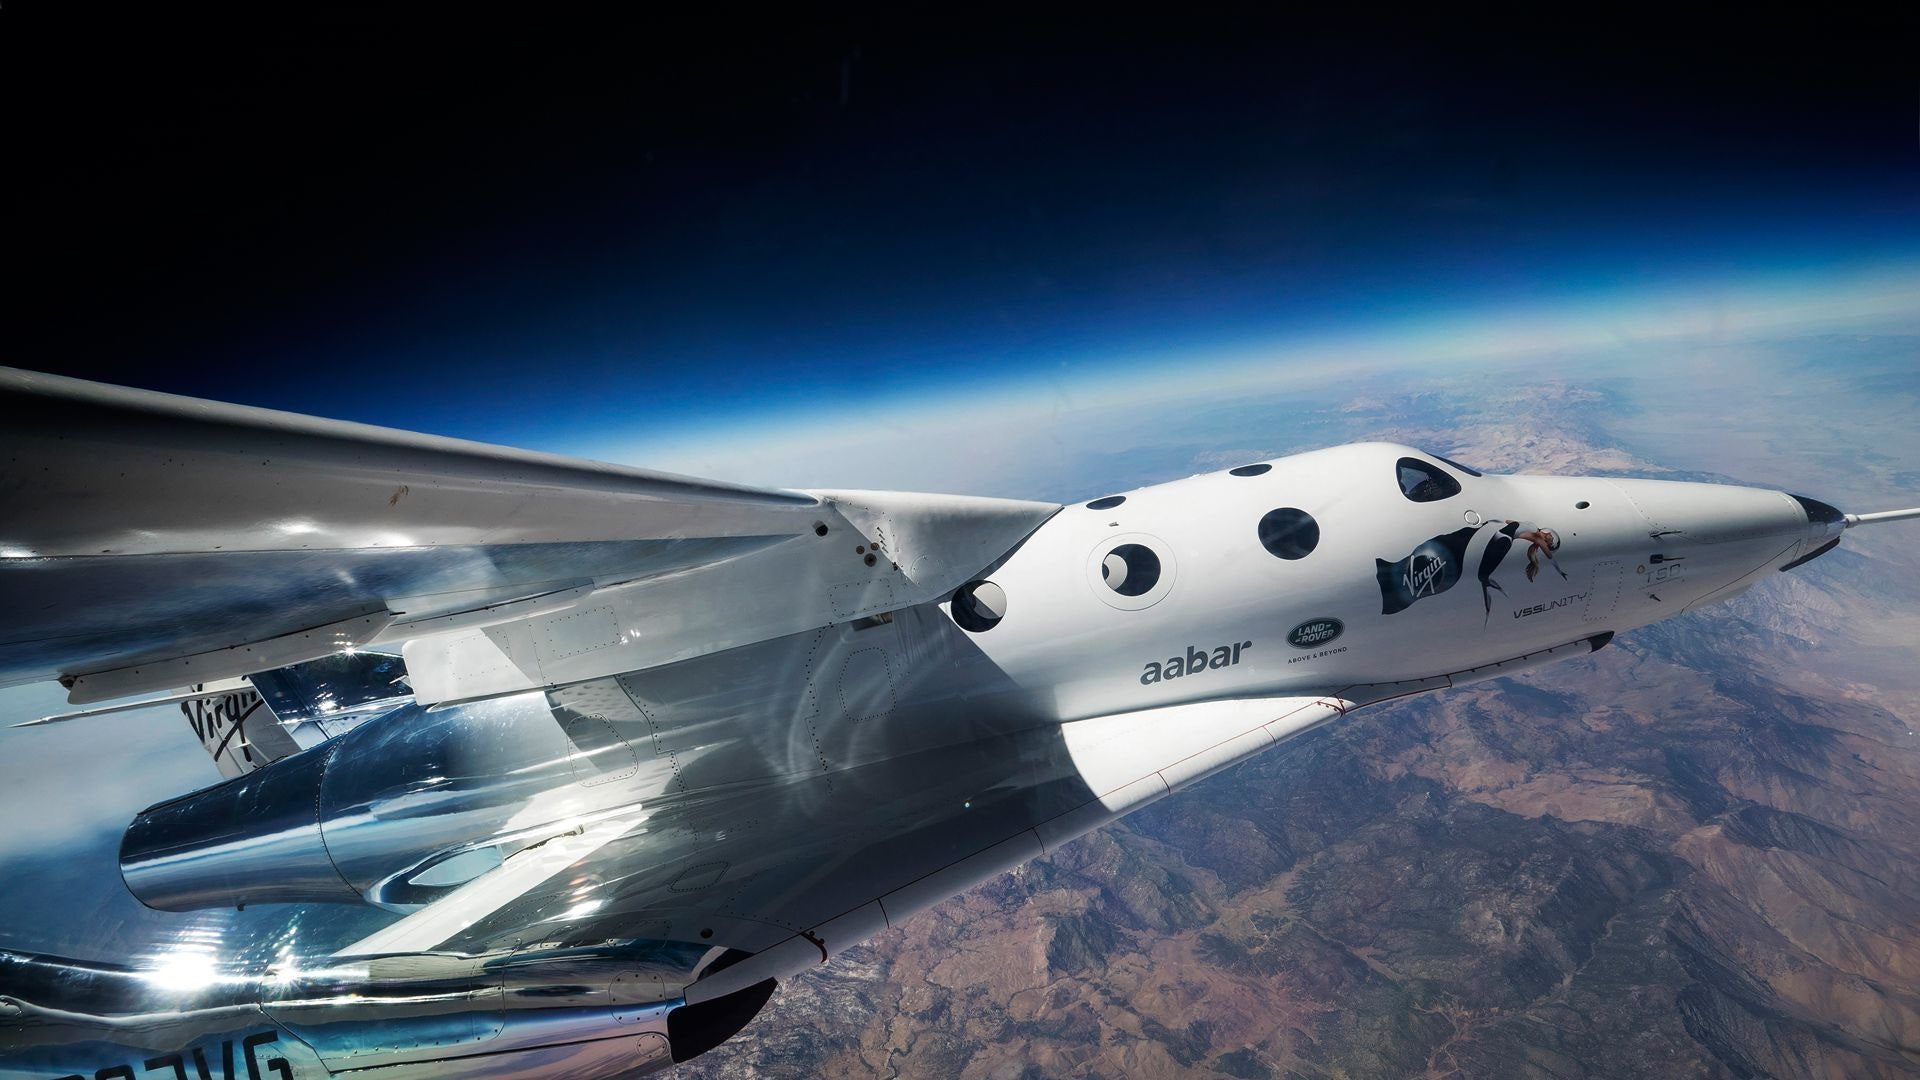 Third Trial a Bust for Virgin Galactic as it Aims to Promote Space Tourism